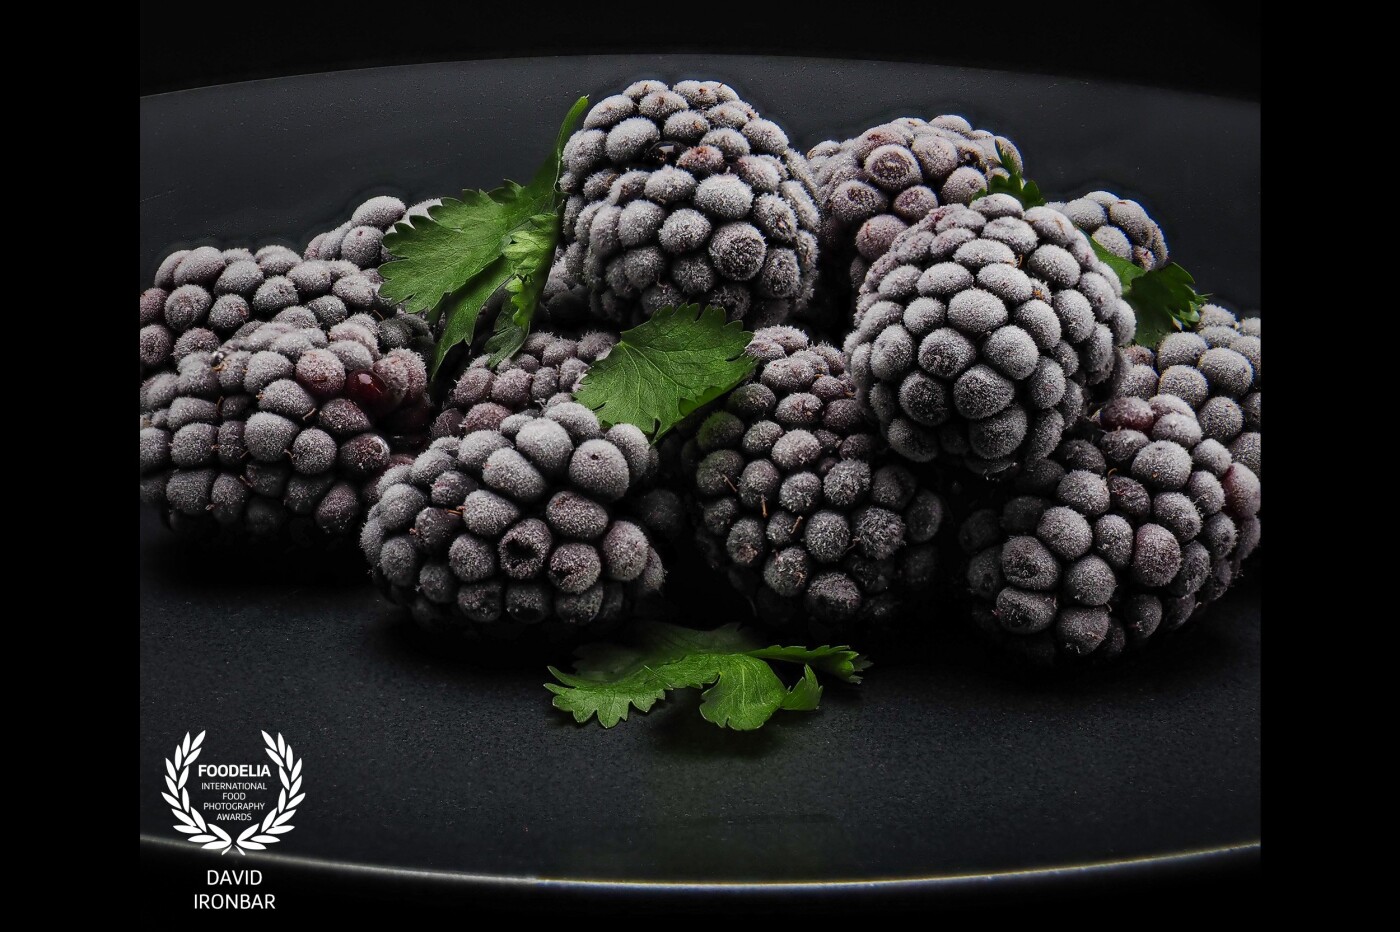 Blackberries contain a wide array of important nutrients such as potassium, magnesium, and calcium, as well as vitamins A, C, E, and B vitamins. They are also a rich source of anthocyanins, powerful antioxidants that give blackberries their deep purple color.